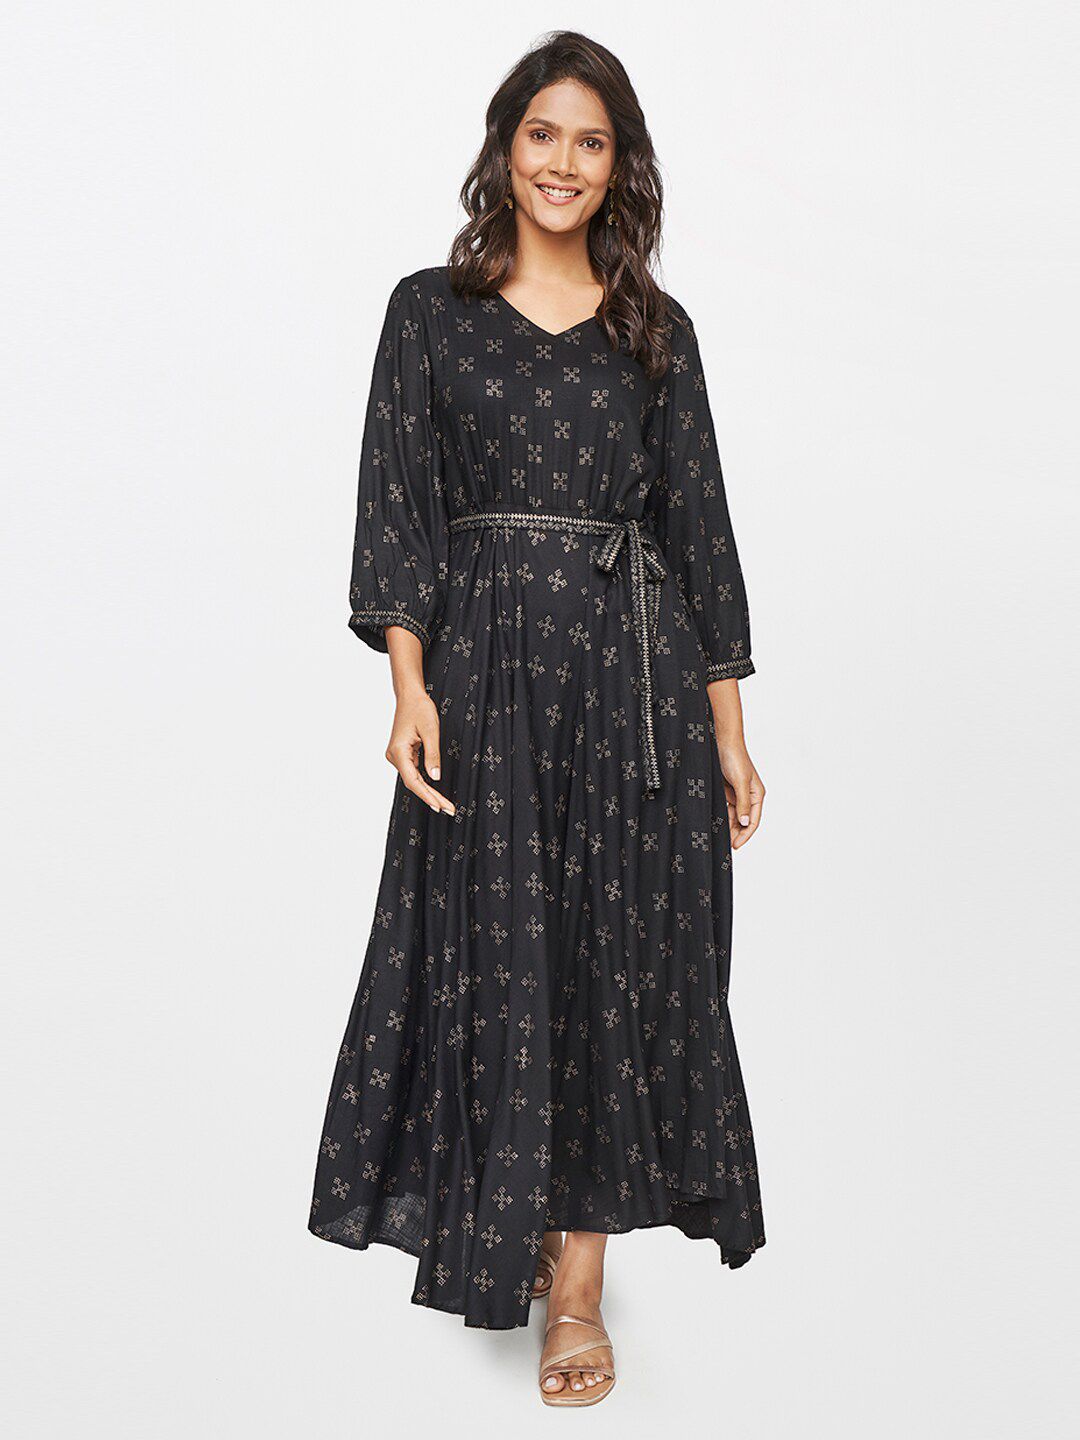 itse Black Floral Dress Price in India